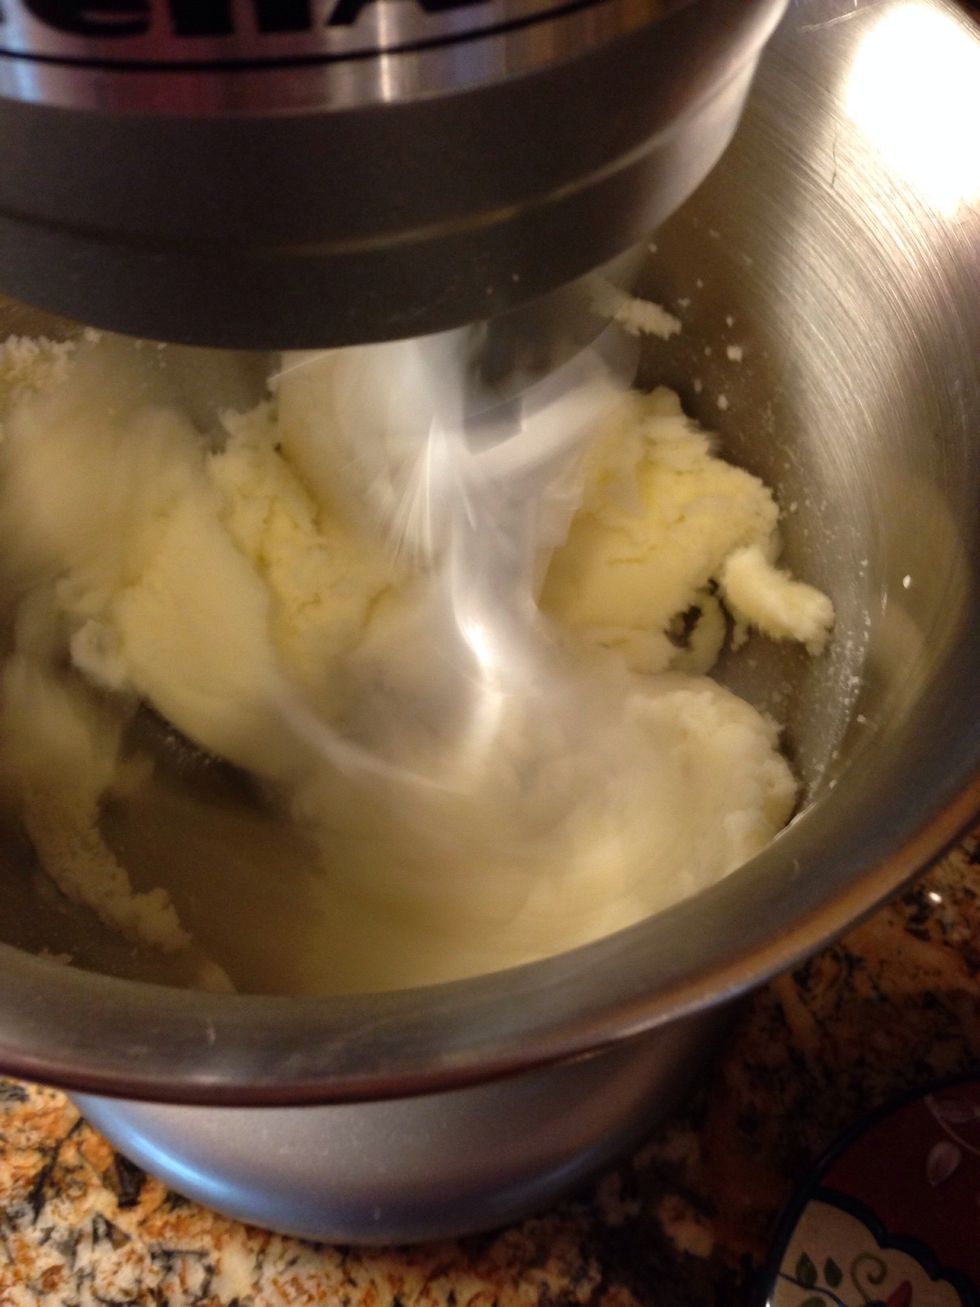 Cream together butter and sugar for three minutes until light and fluffy!